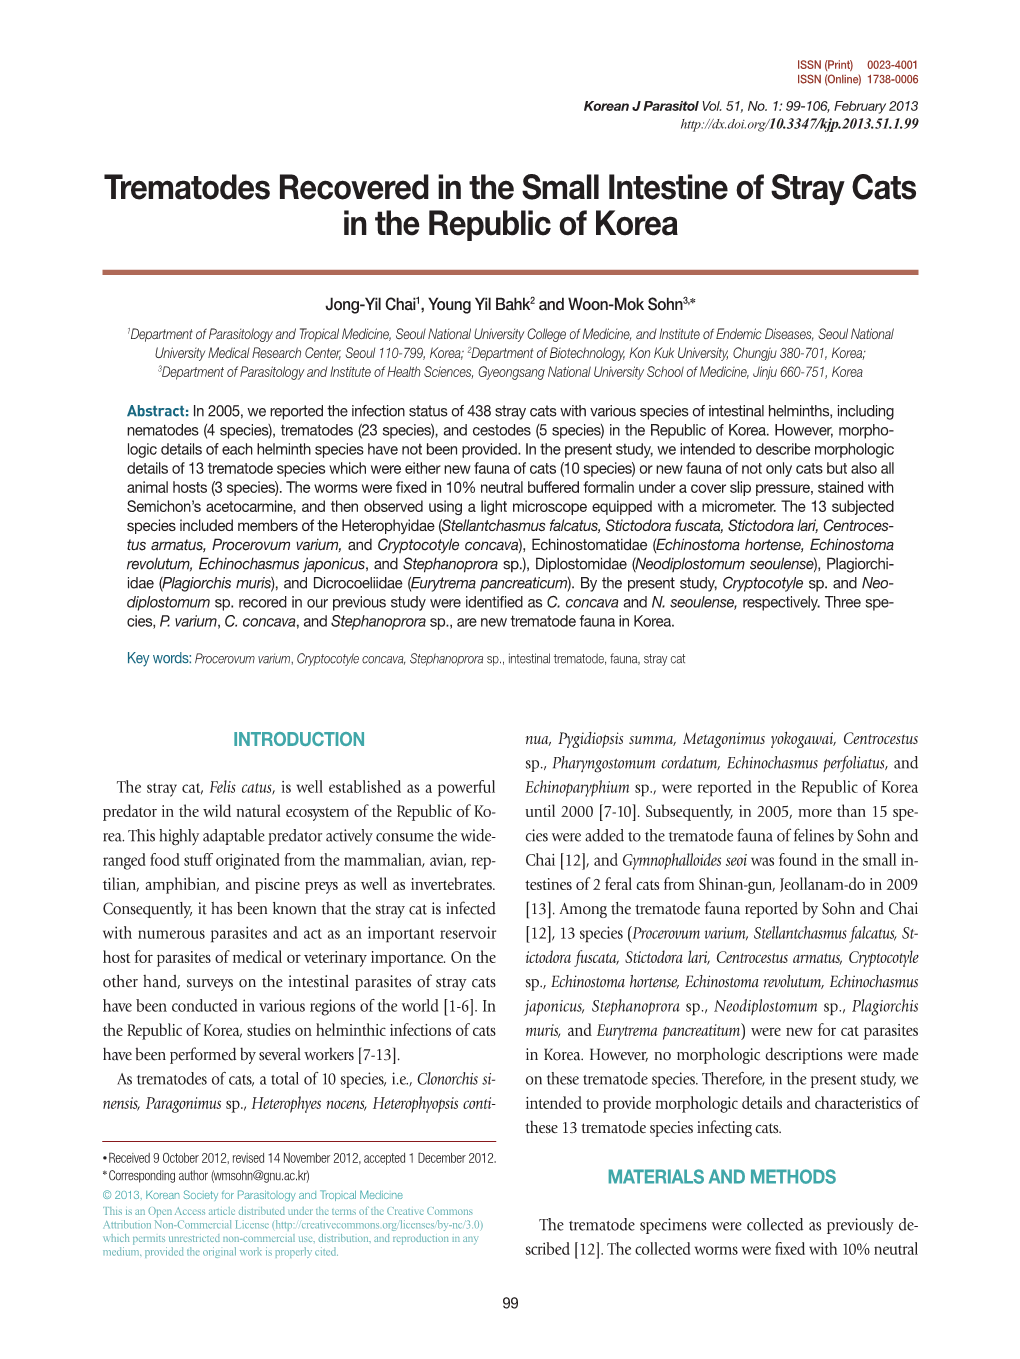 Trematodes Recovered in the Small Intestine of Stray Cats in the Republic of Korea